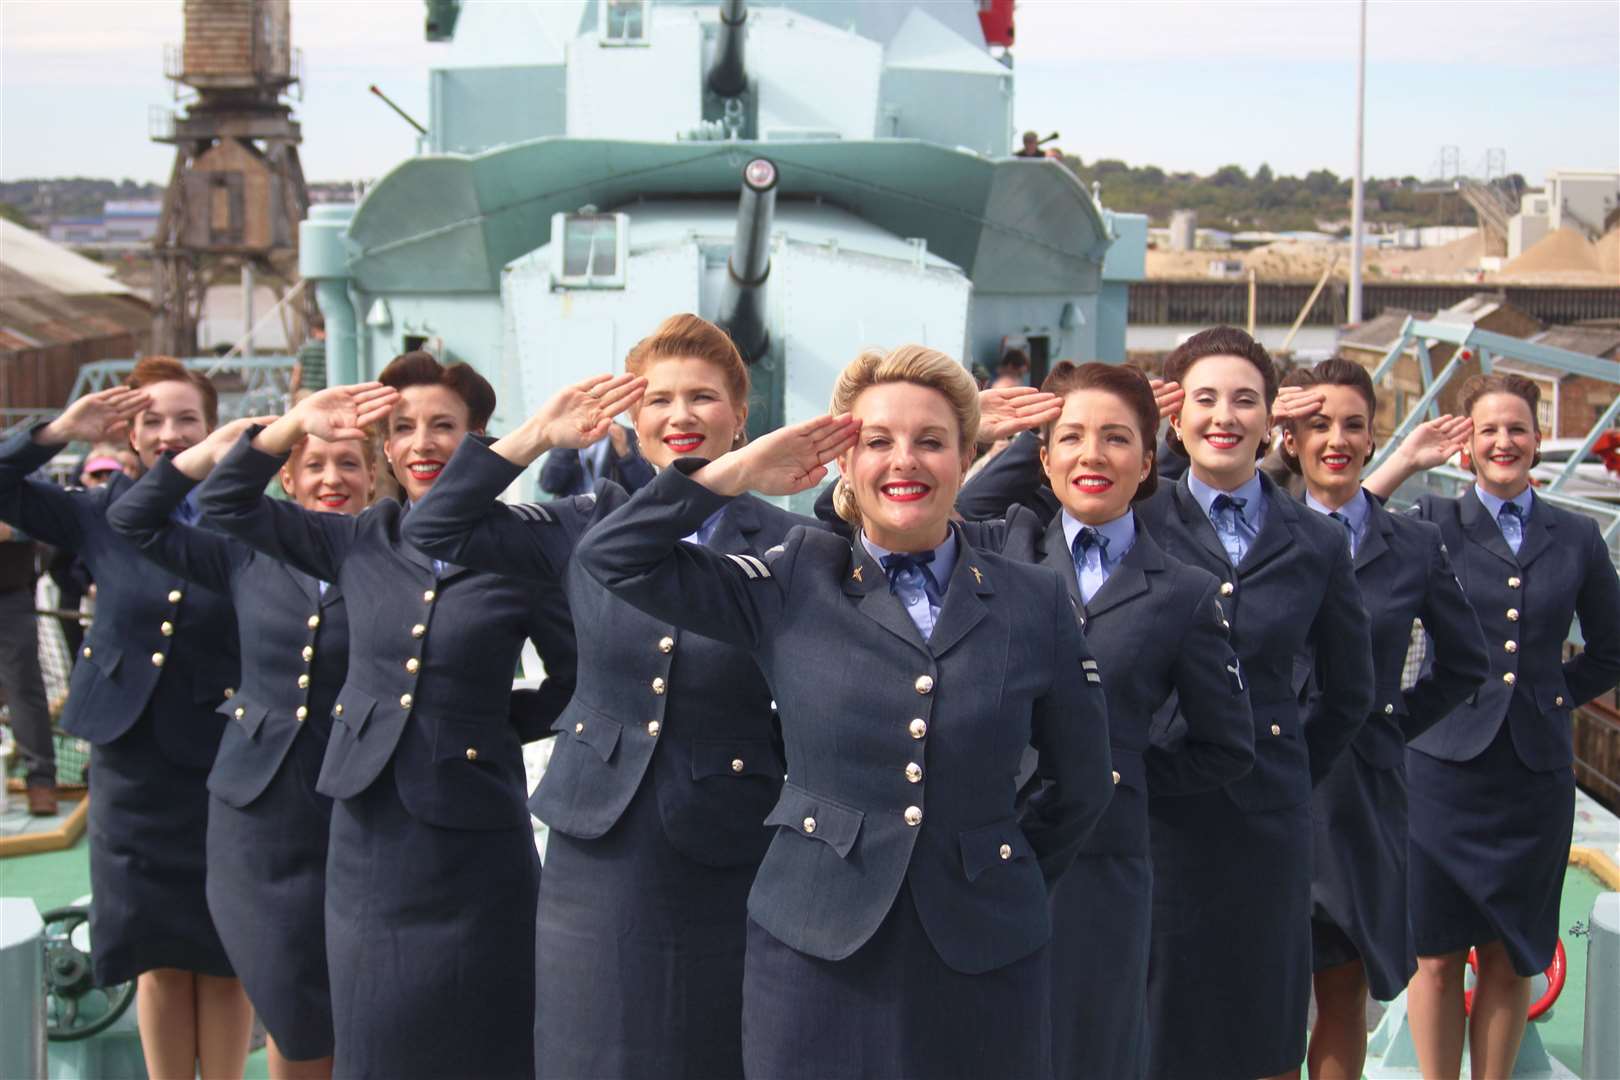 See the D-Day Darlings at The Historic Dockyard Chatham’s must-visit vintage weekend, Salute to the '40s this September